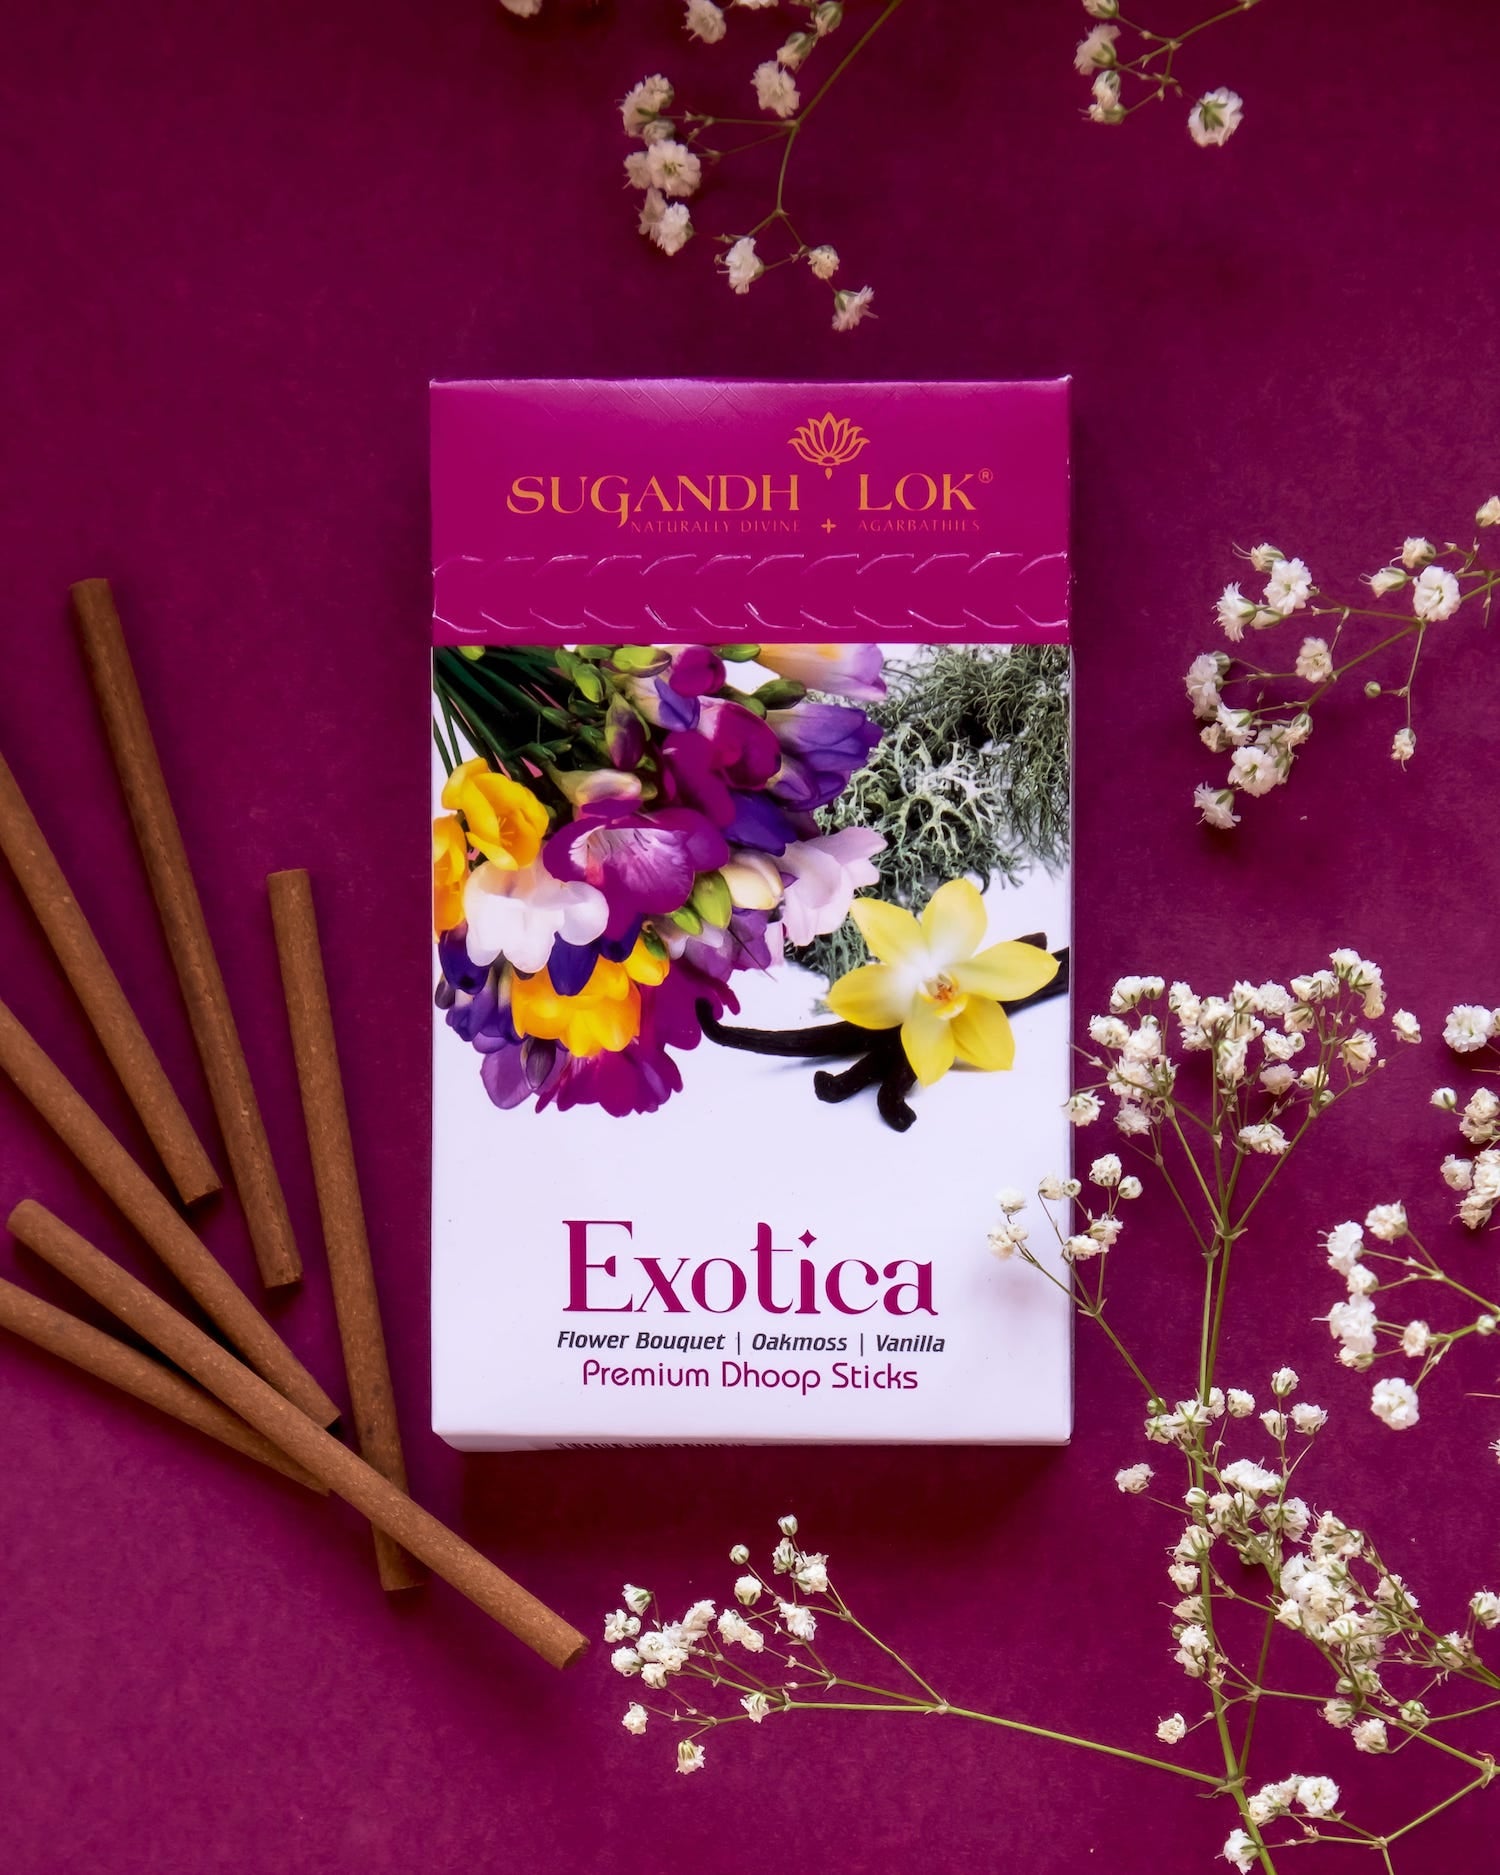 Exotica Dhoop Sticks Pouch Surrounded by Flowers and Dhoop Sticks